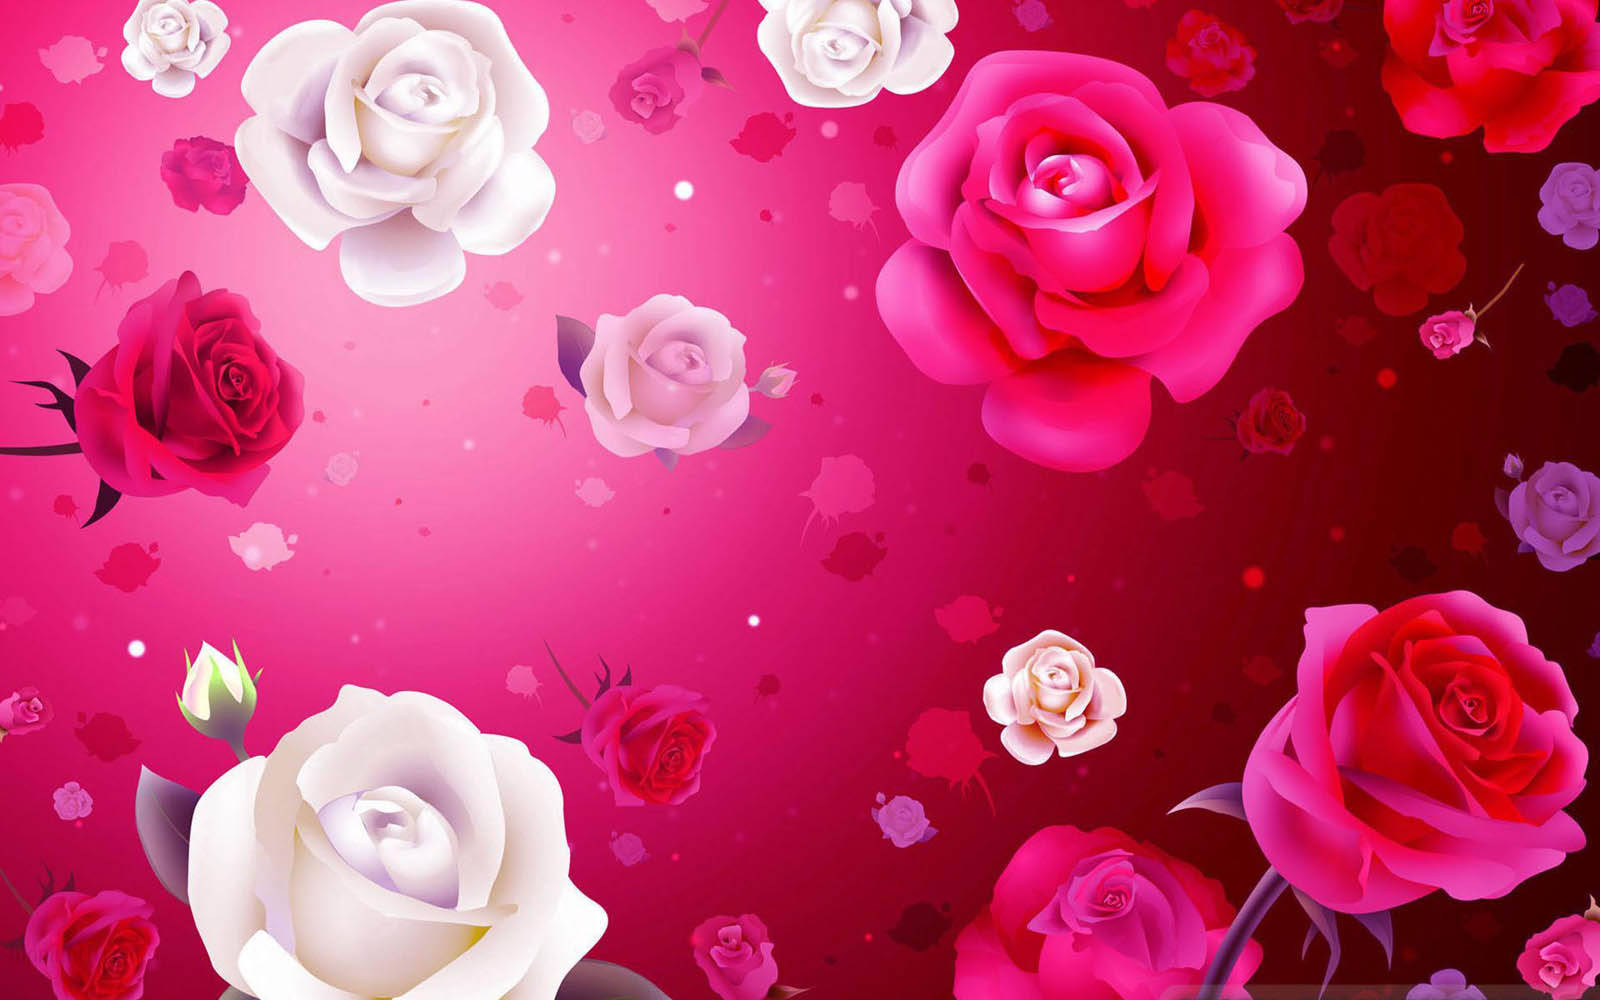 Show Your Love This Valentine's Day With Colorful Roses Wallpaper